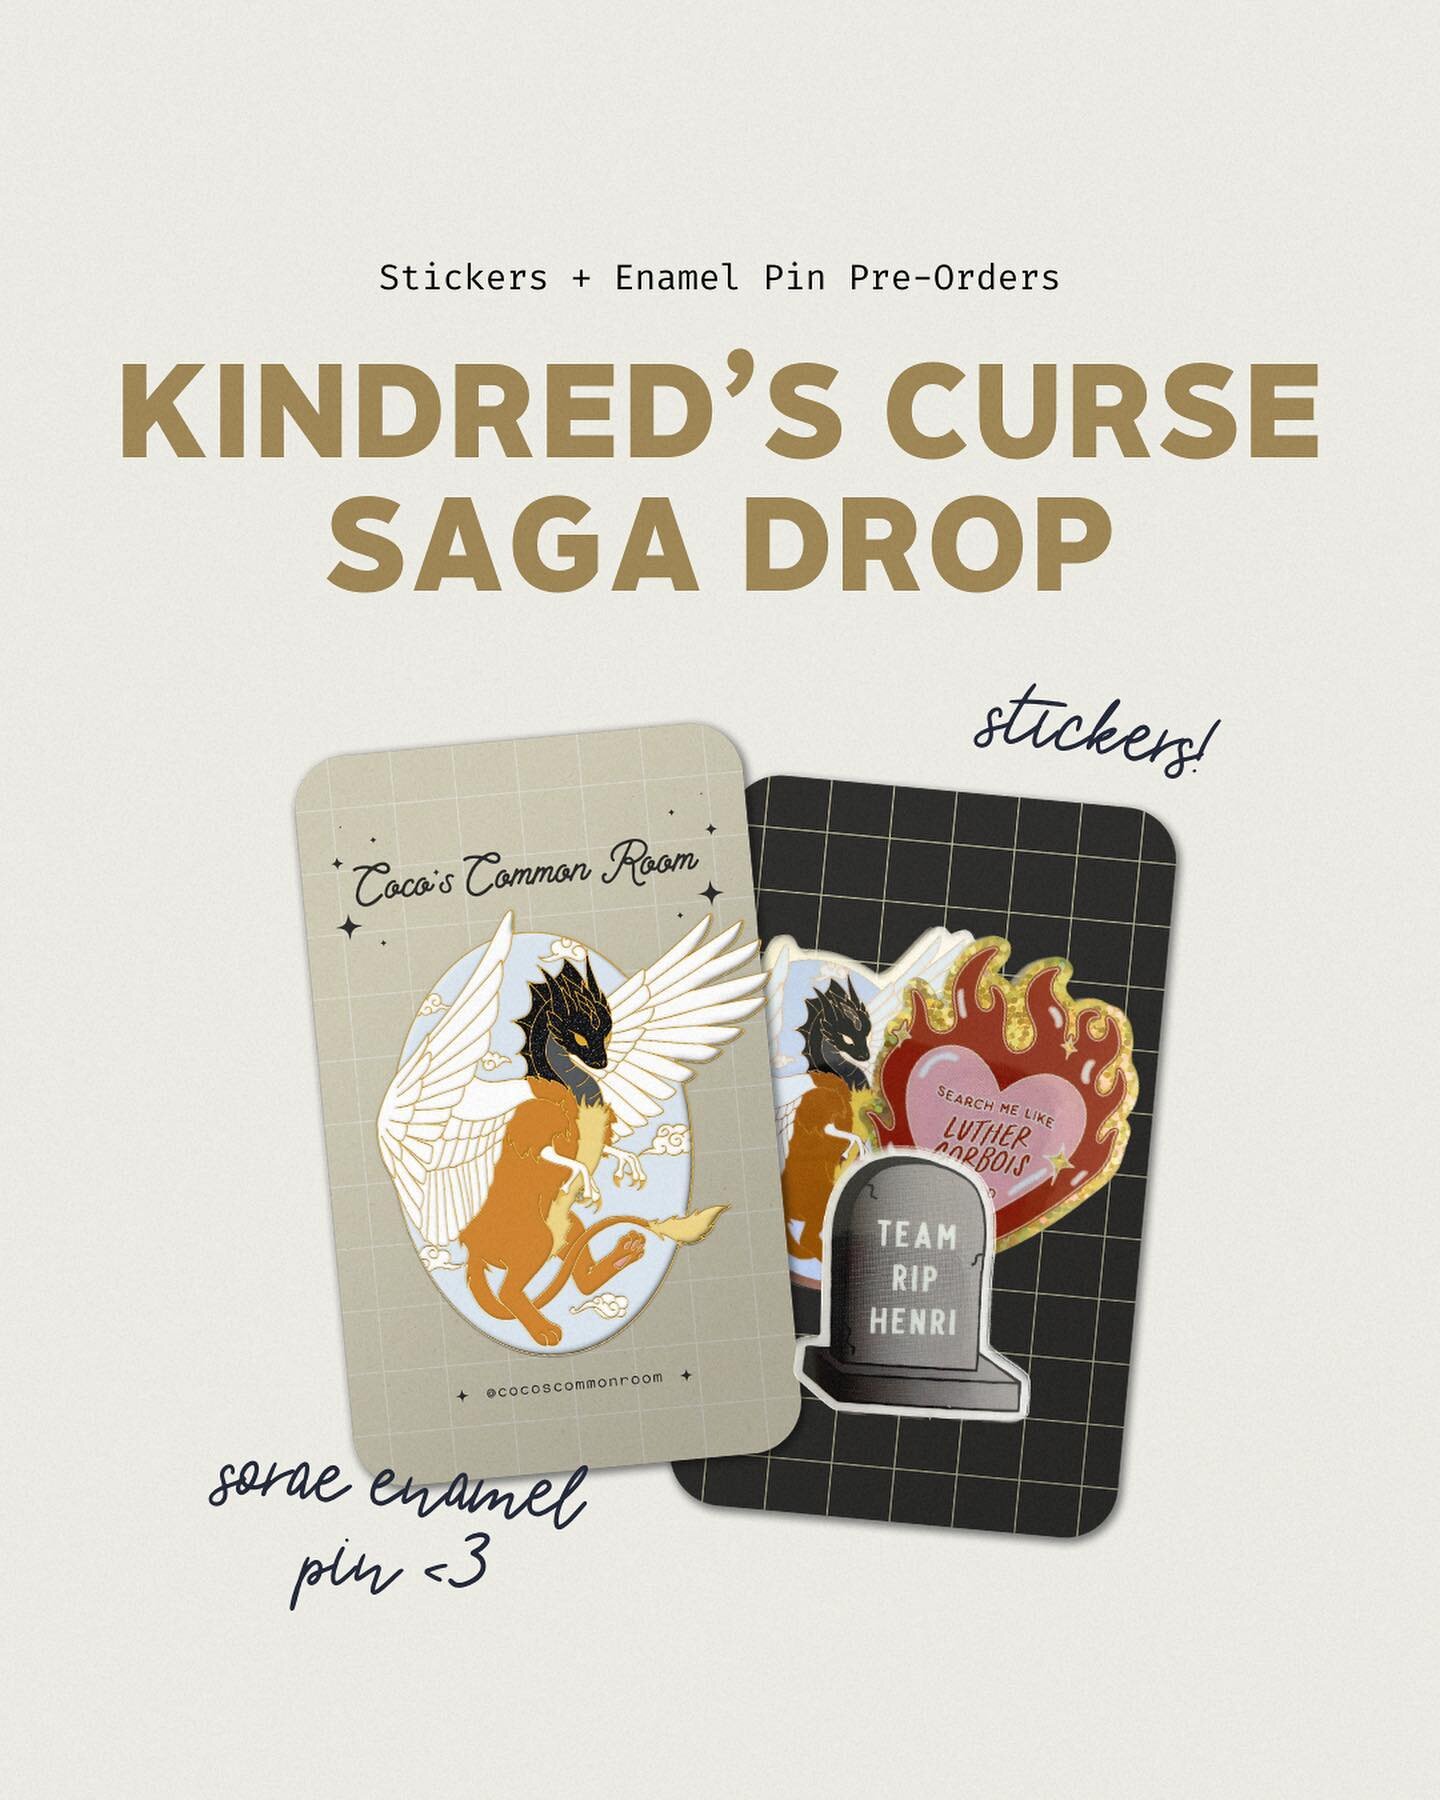 Y&rsquo;ALLLLLLLLL!!!!! I am so excited to share that the amazingly talented @cocoscommonroom has just launched a line of officially licensed merch inspired by The Kindred&rsquo;s Curse Saga! I am OBSESSED!!!!! You can find more info on the post on h